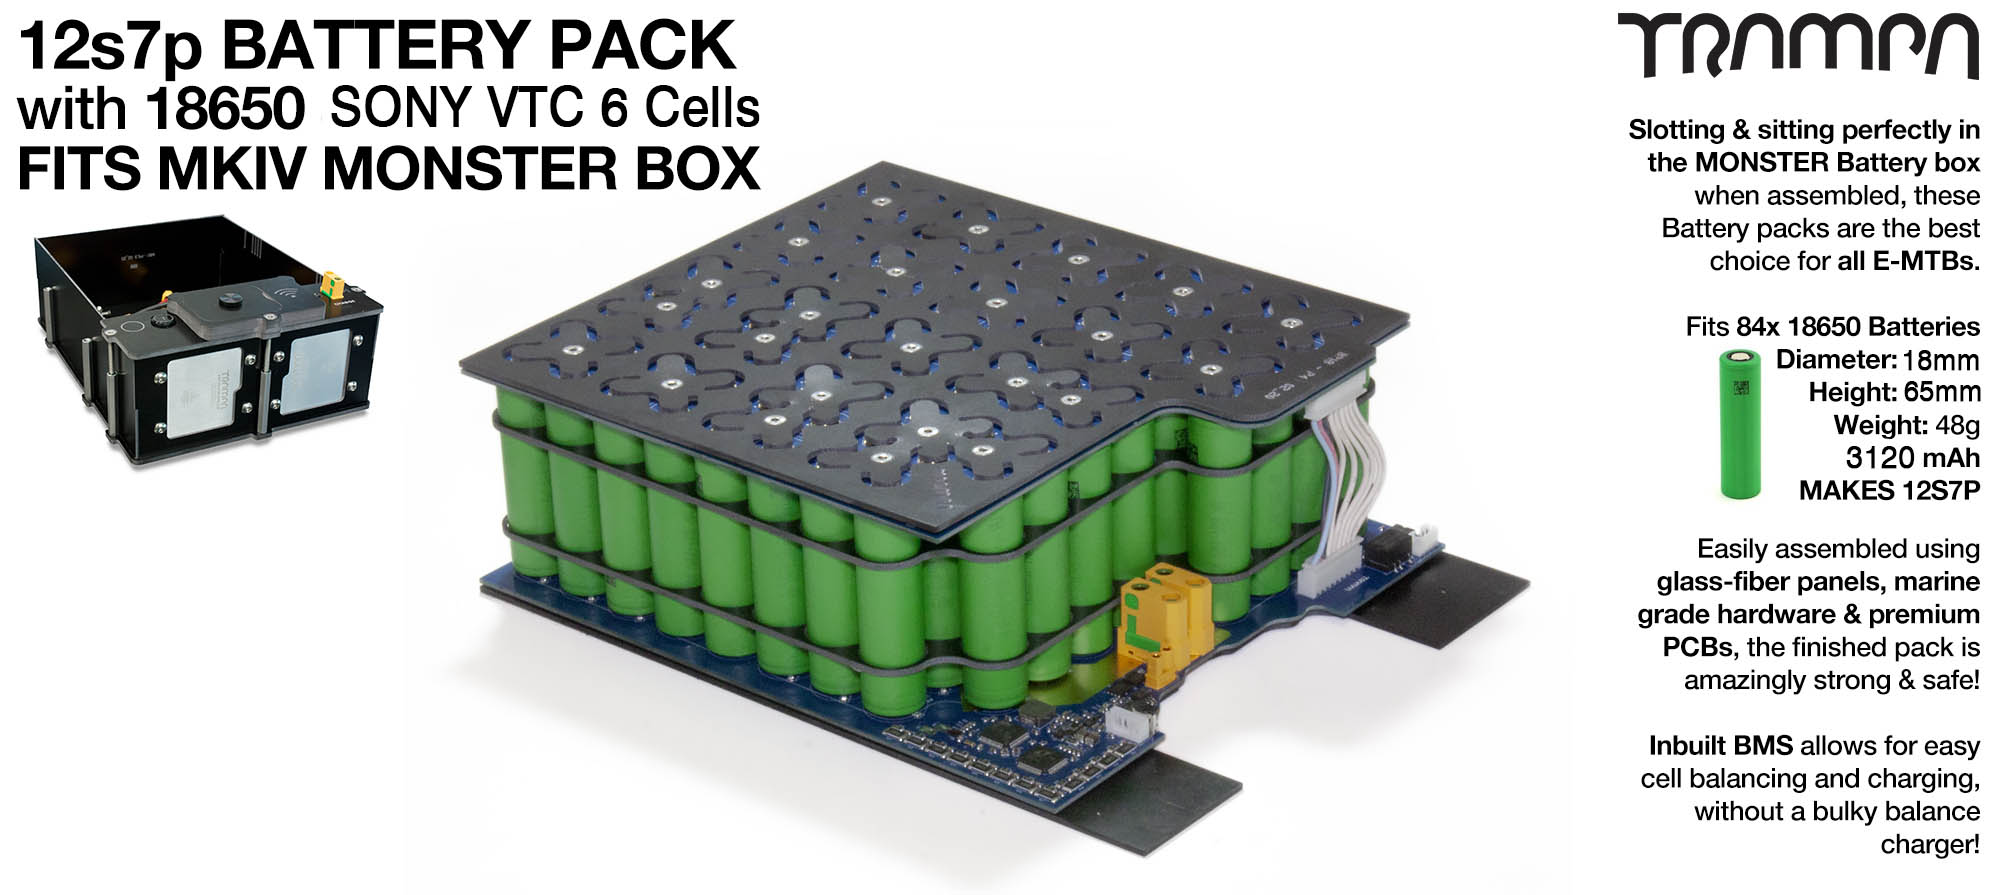 18650 PCB Pack with BMS (To power 2x VESC6) & 84 x 18650 cells to give 21A of Range - Requires MKIV Classic MONSTER box onwards to fit - UK CUSTOMERS ONLY